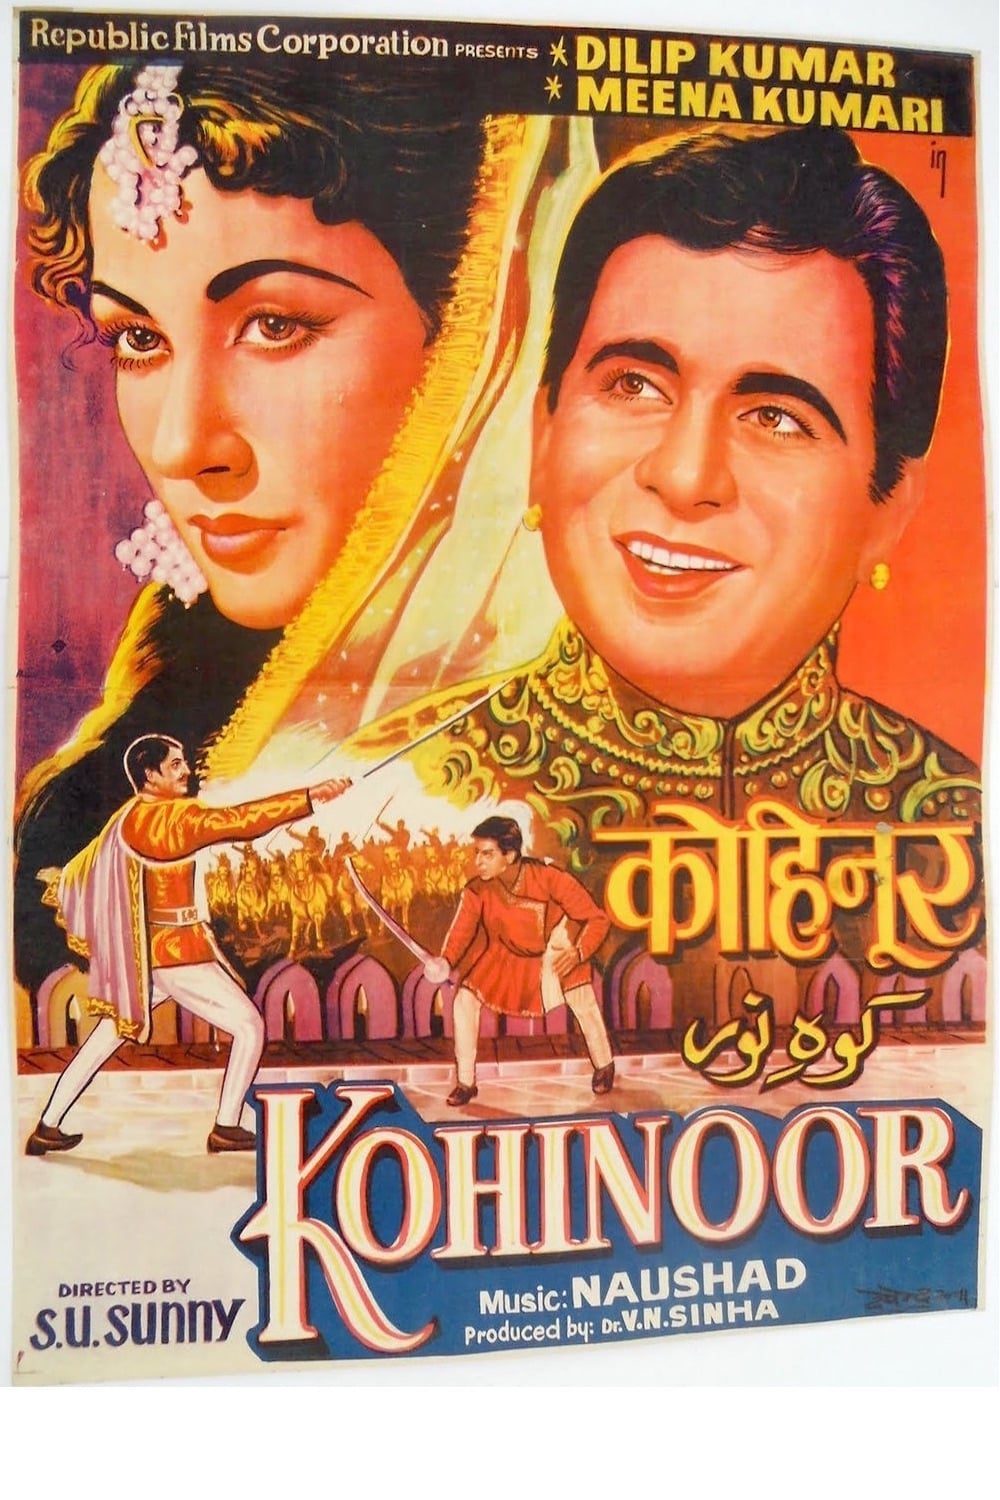 Poster for the movie "Kohinoor"